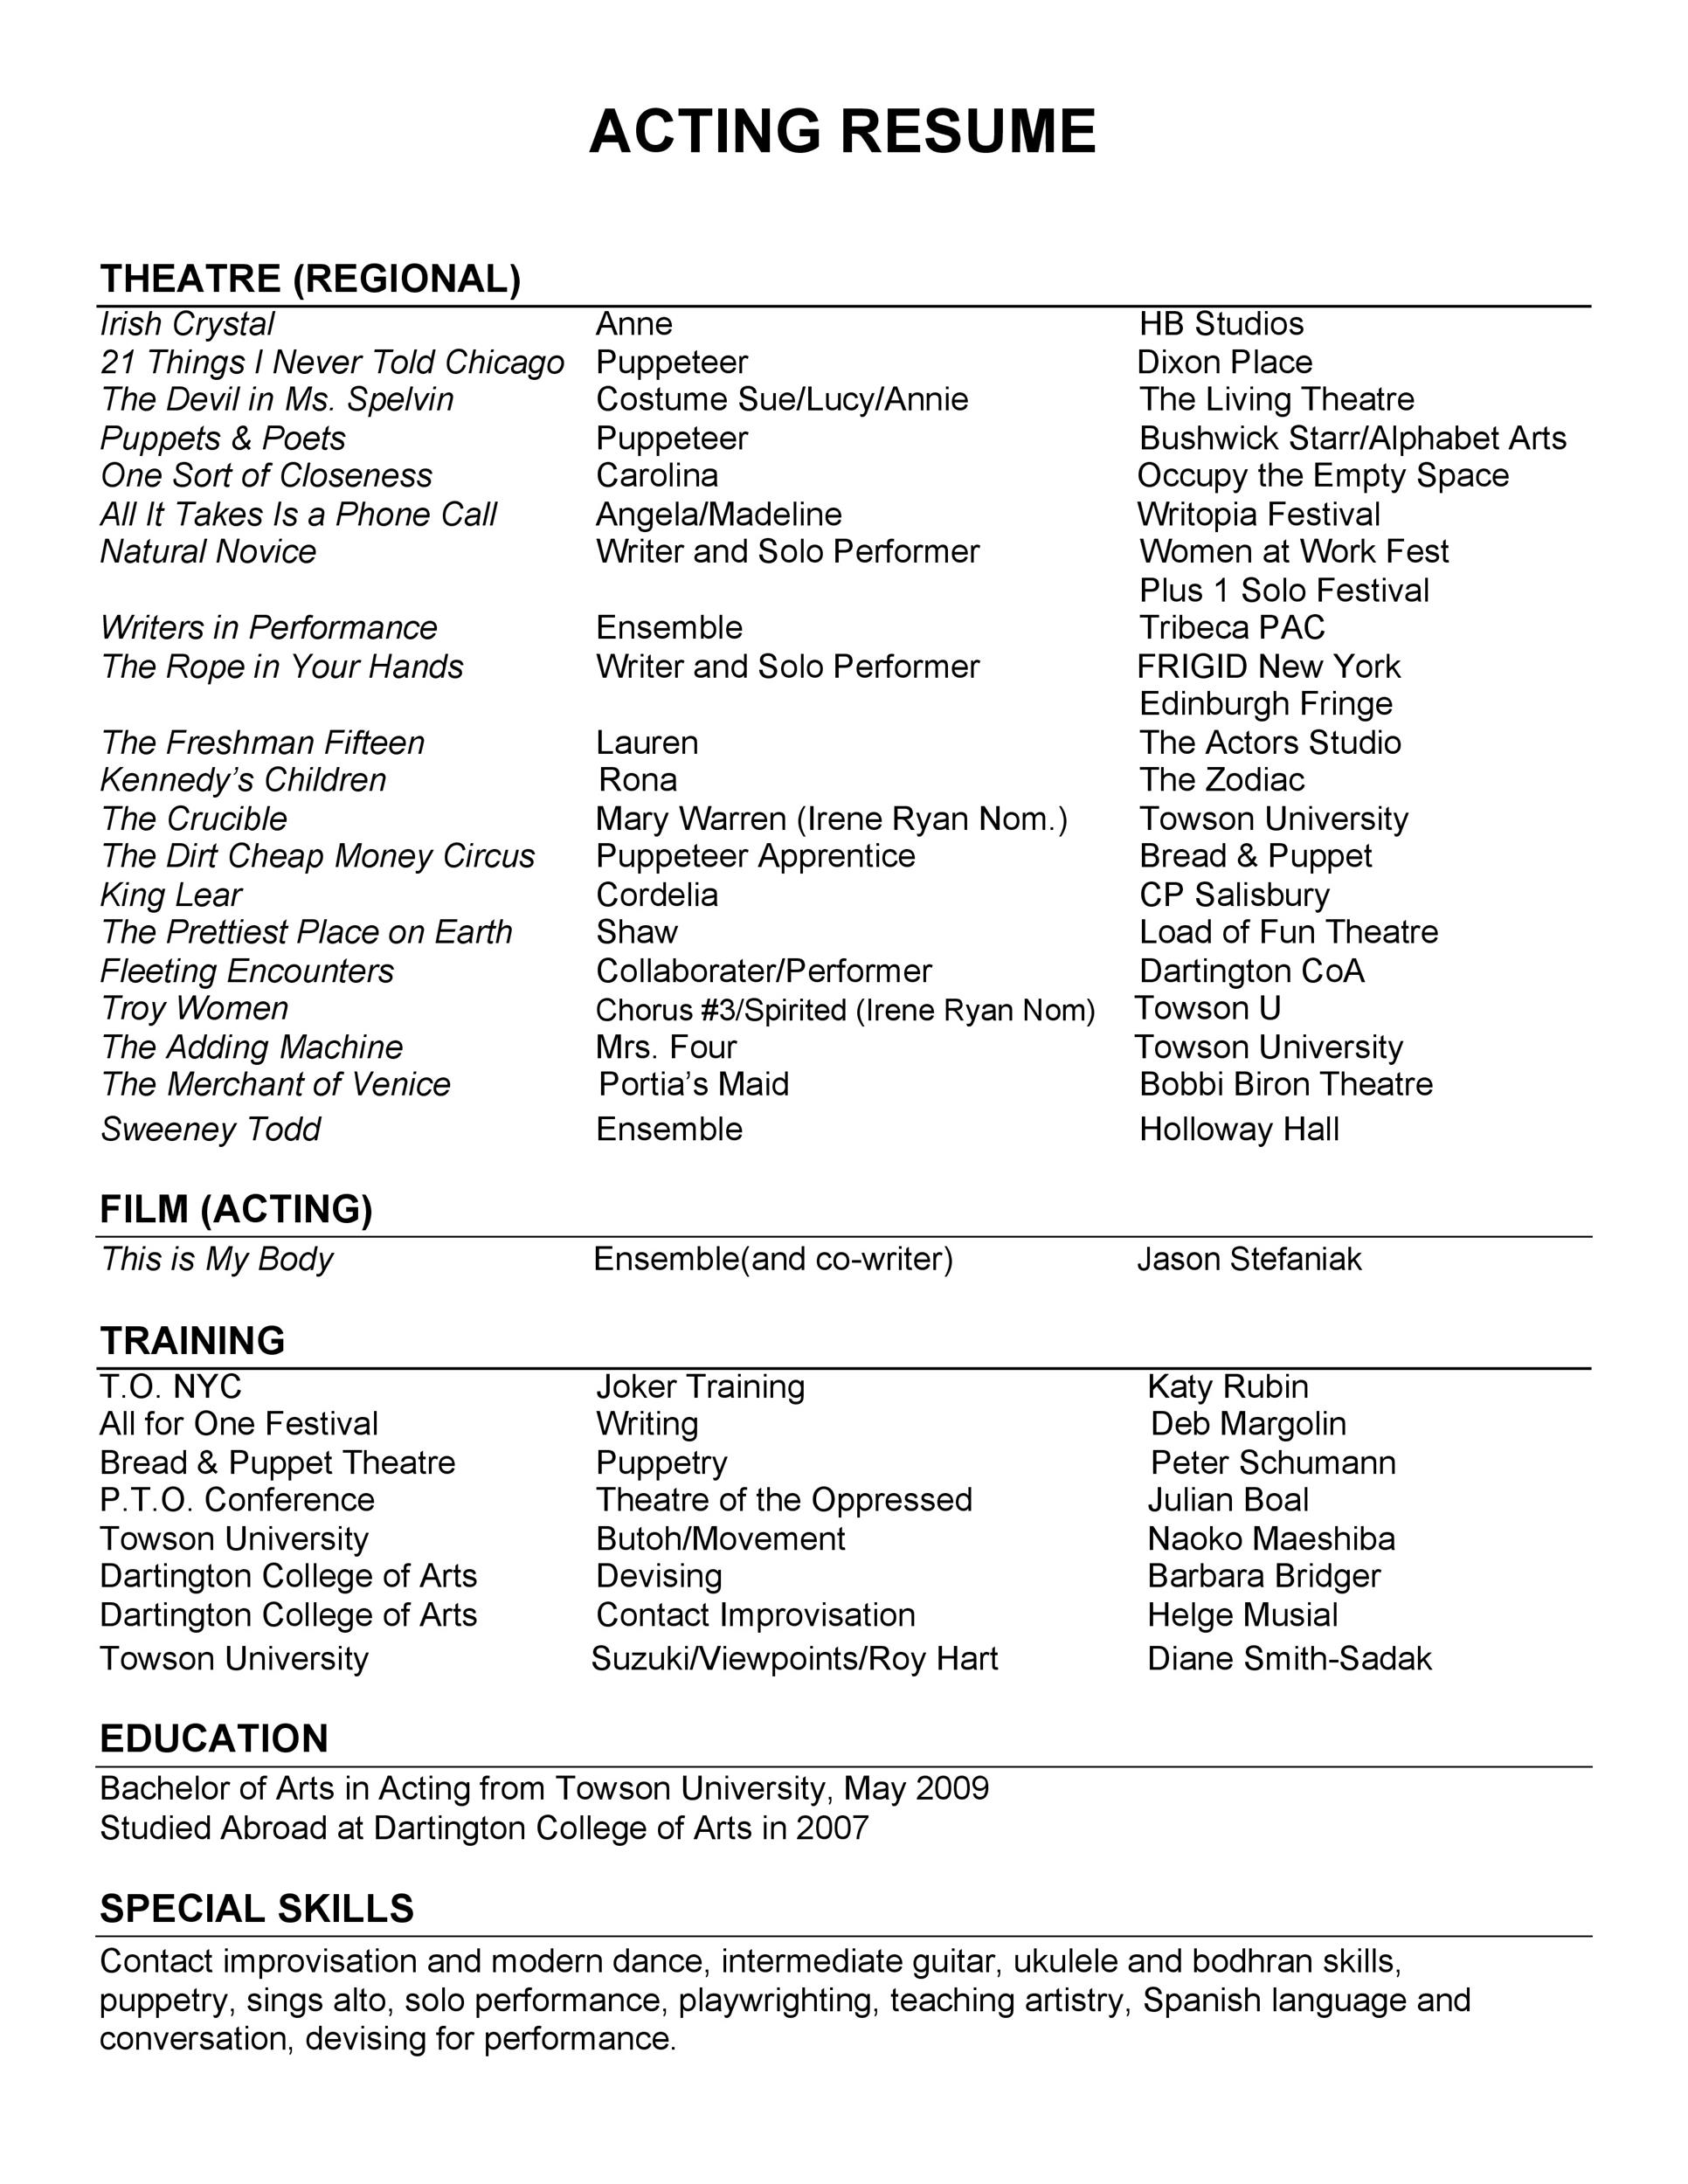 Acting Resume Template 04 ?w=395